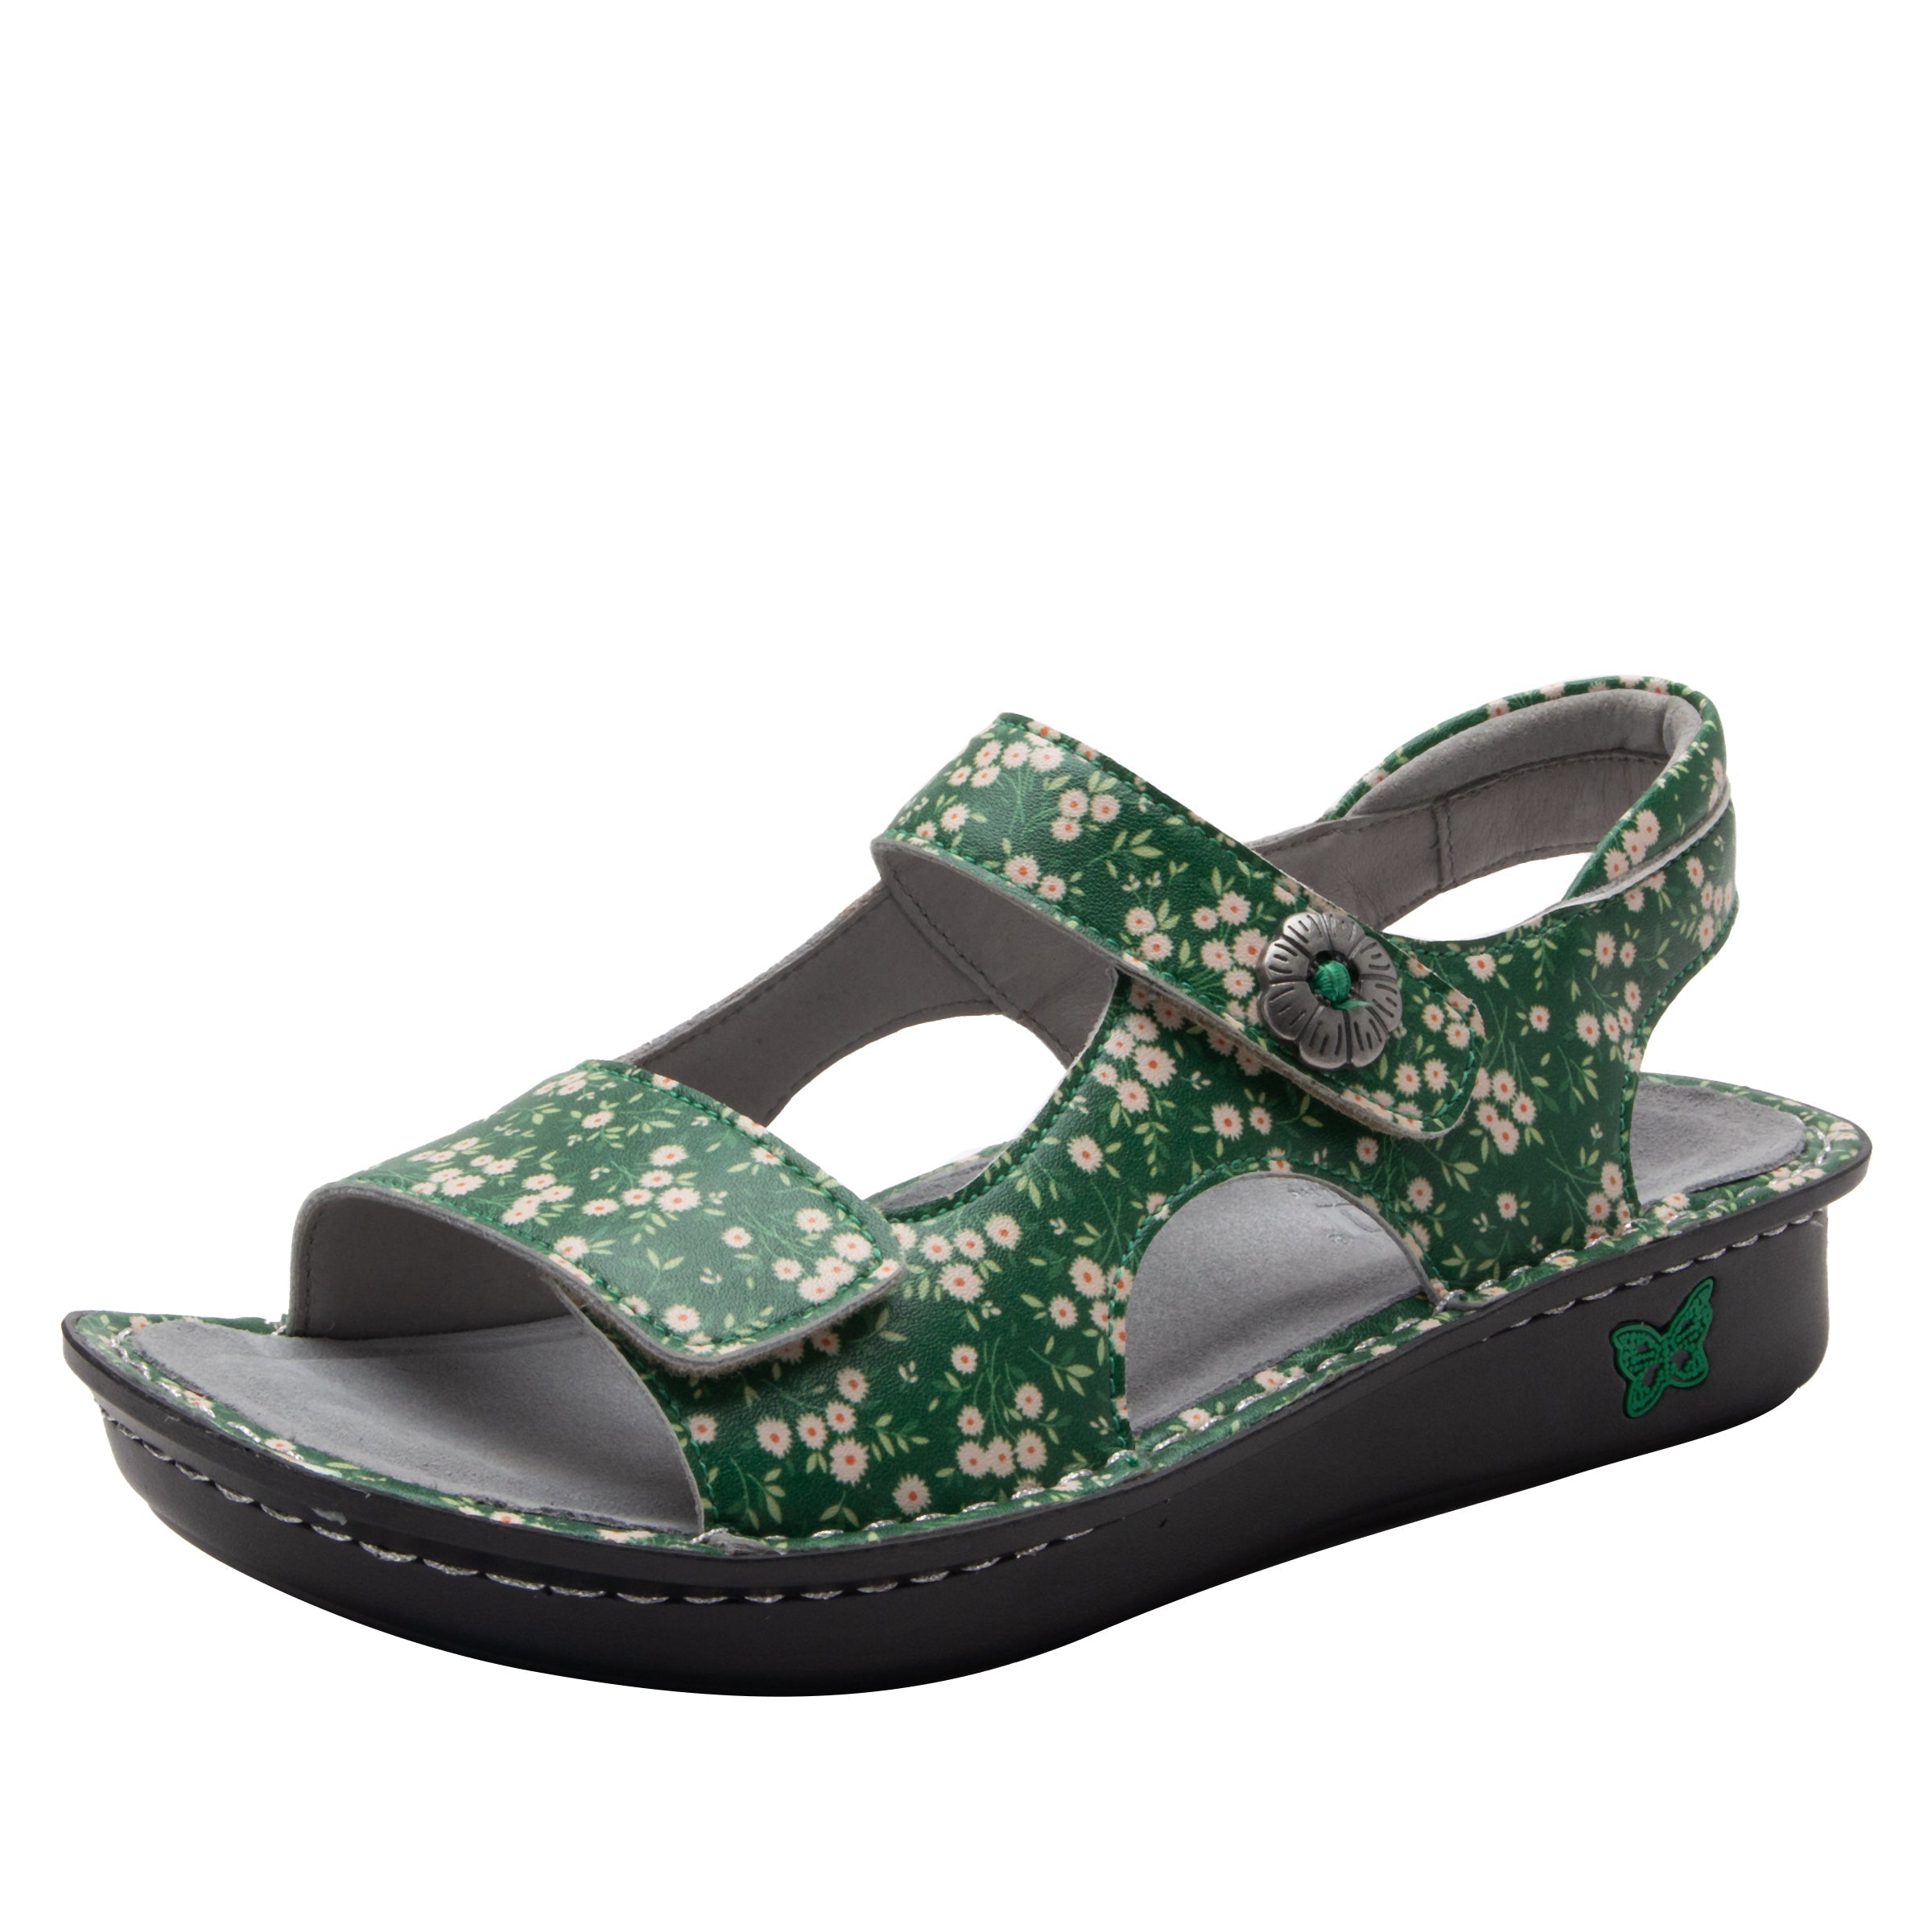 Beckie Green Acres Sandal Alegria Shoes